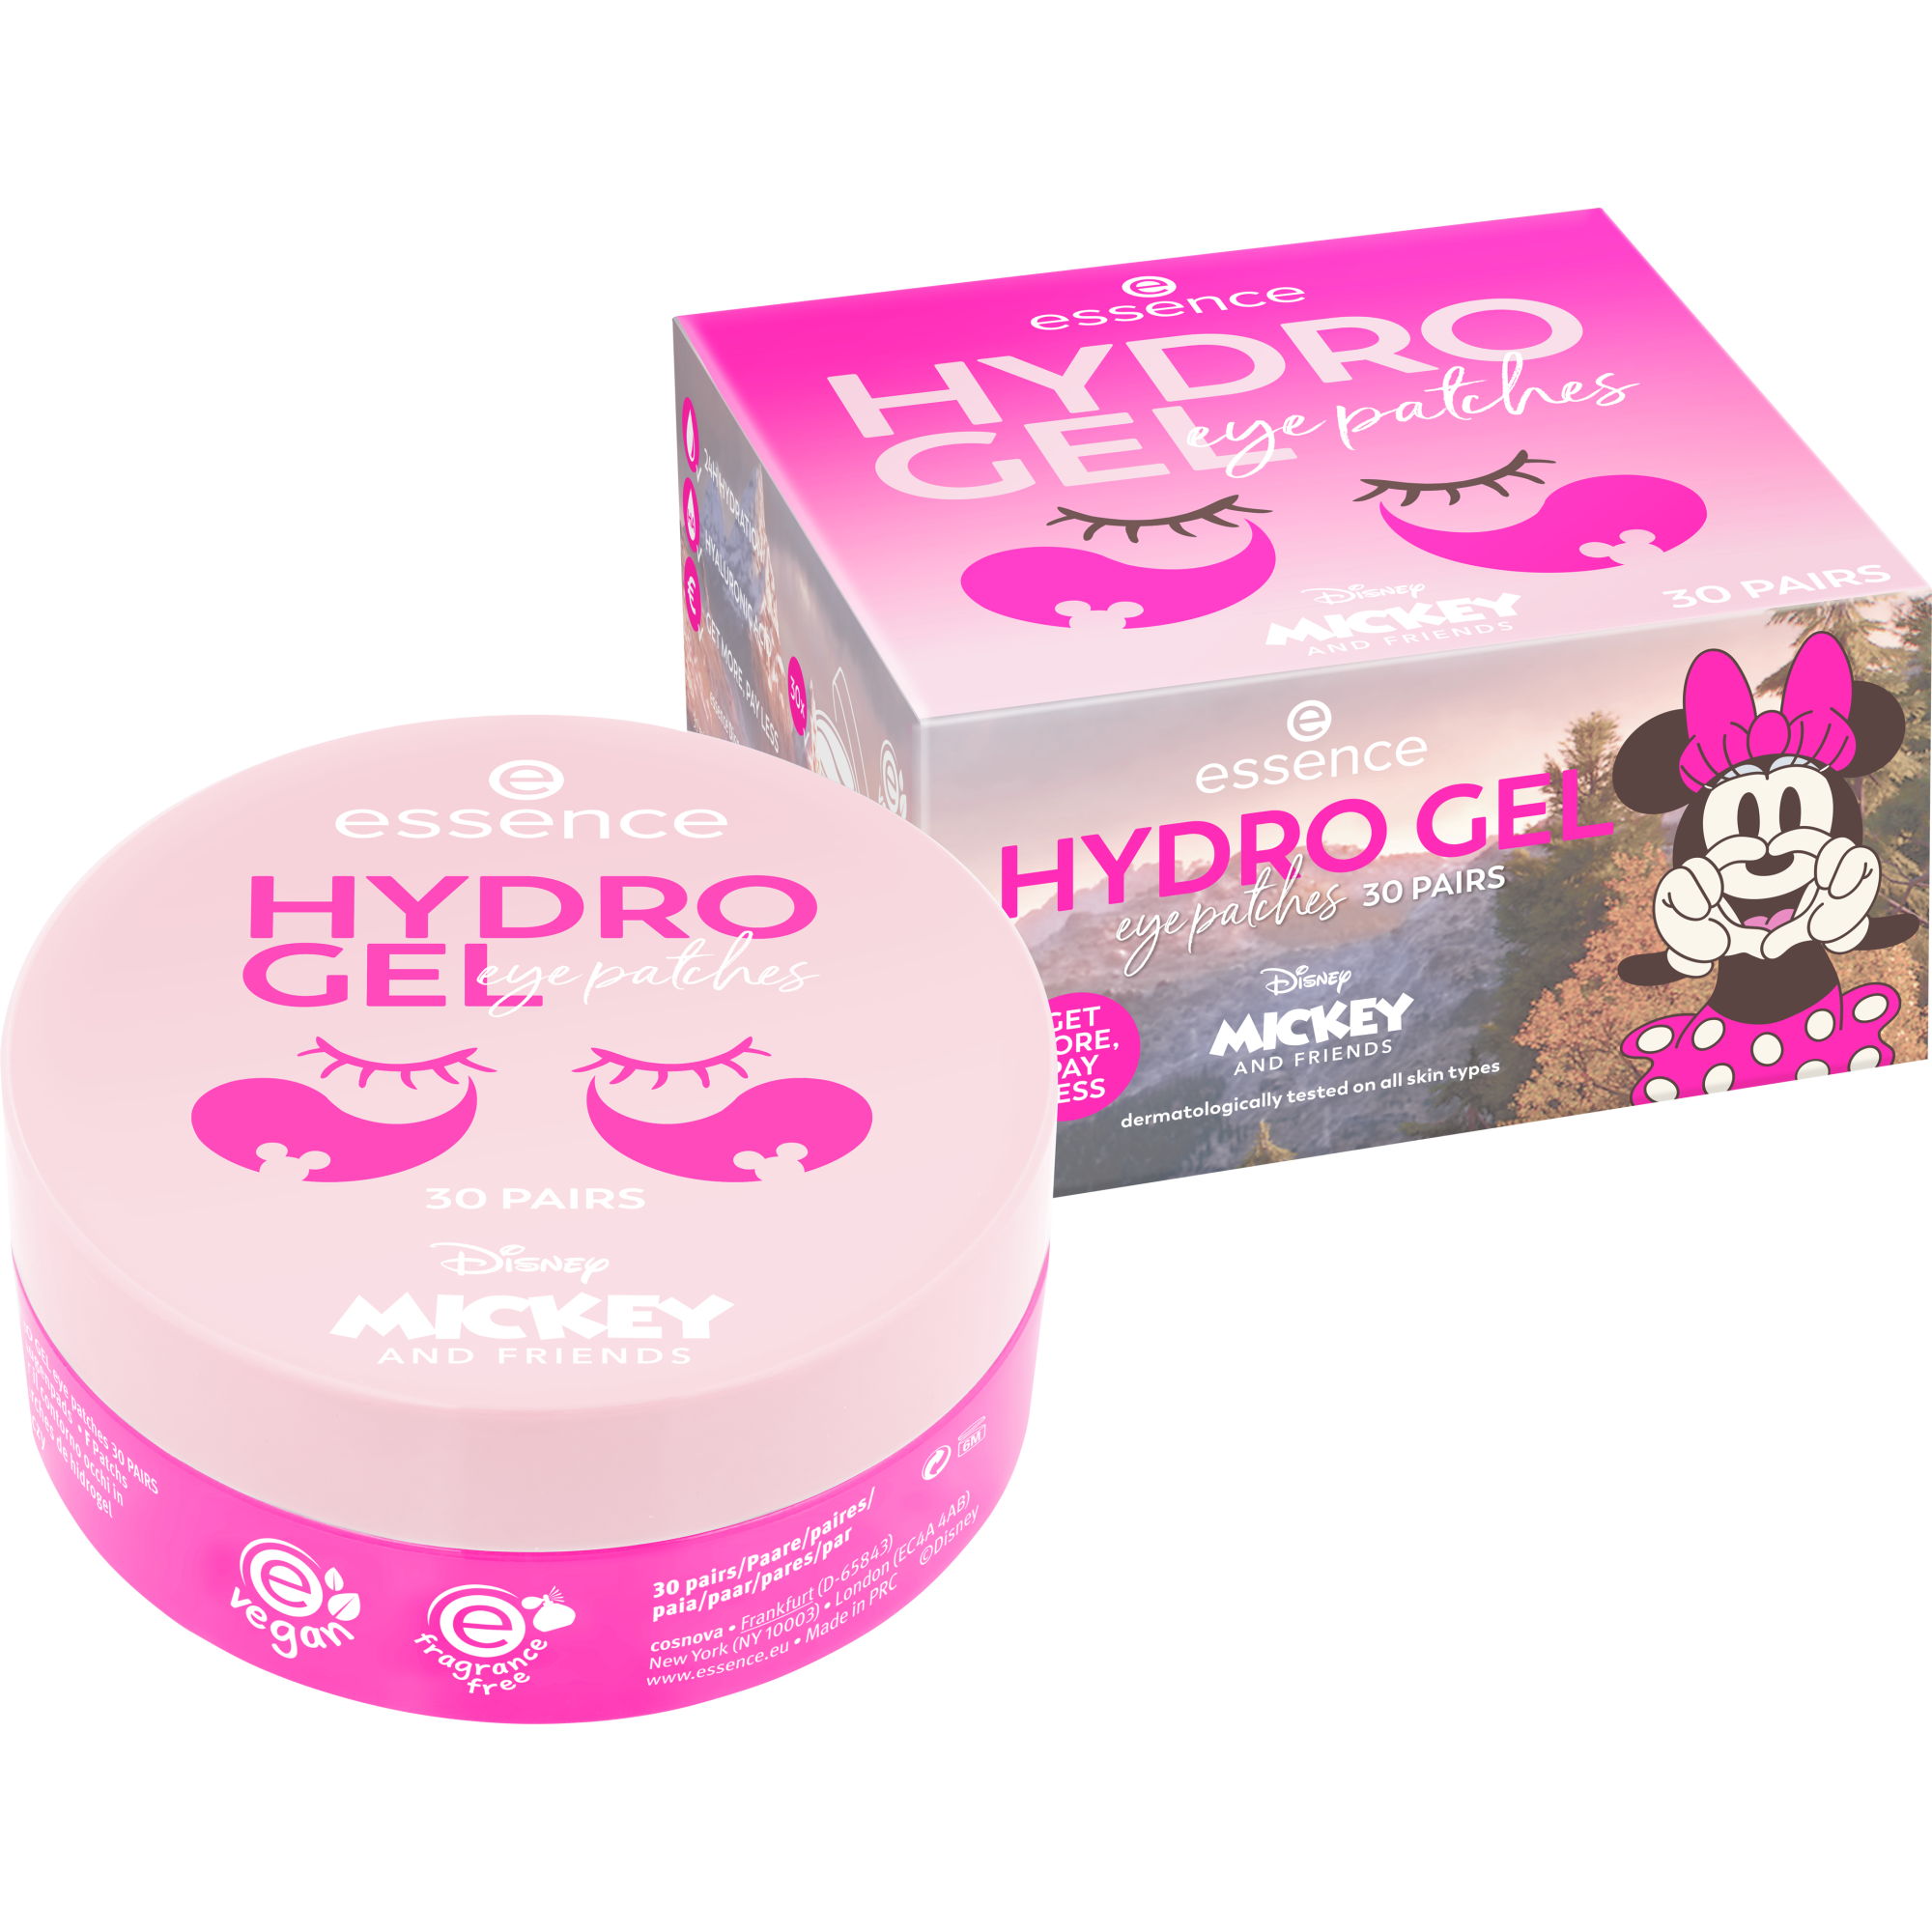 Disney Mickey and Friends HYDRO GEL eye patches 30 PAIRS